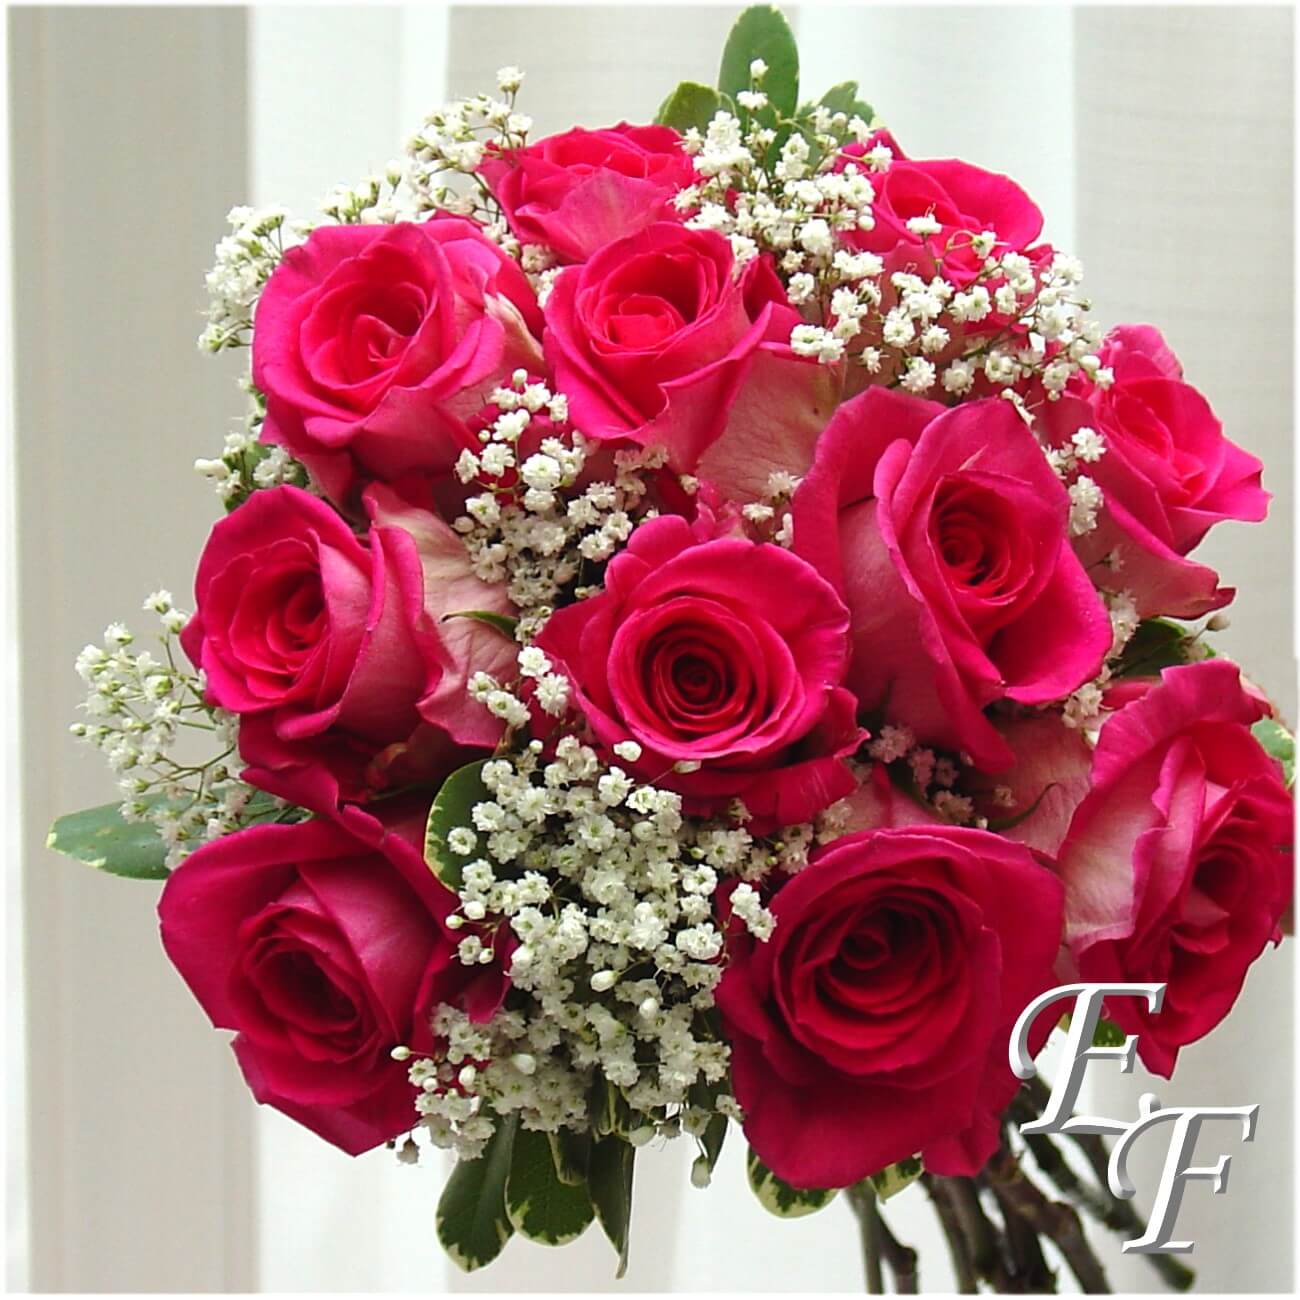 bright pink roses bouquet